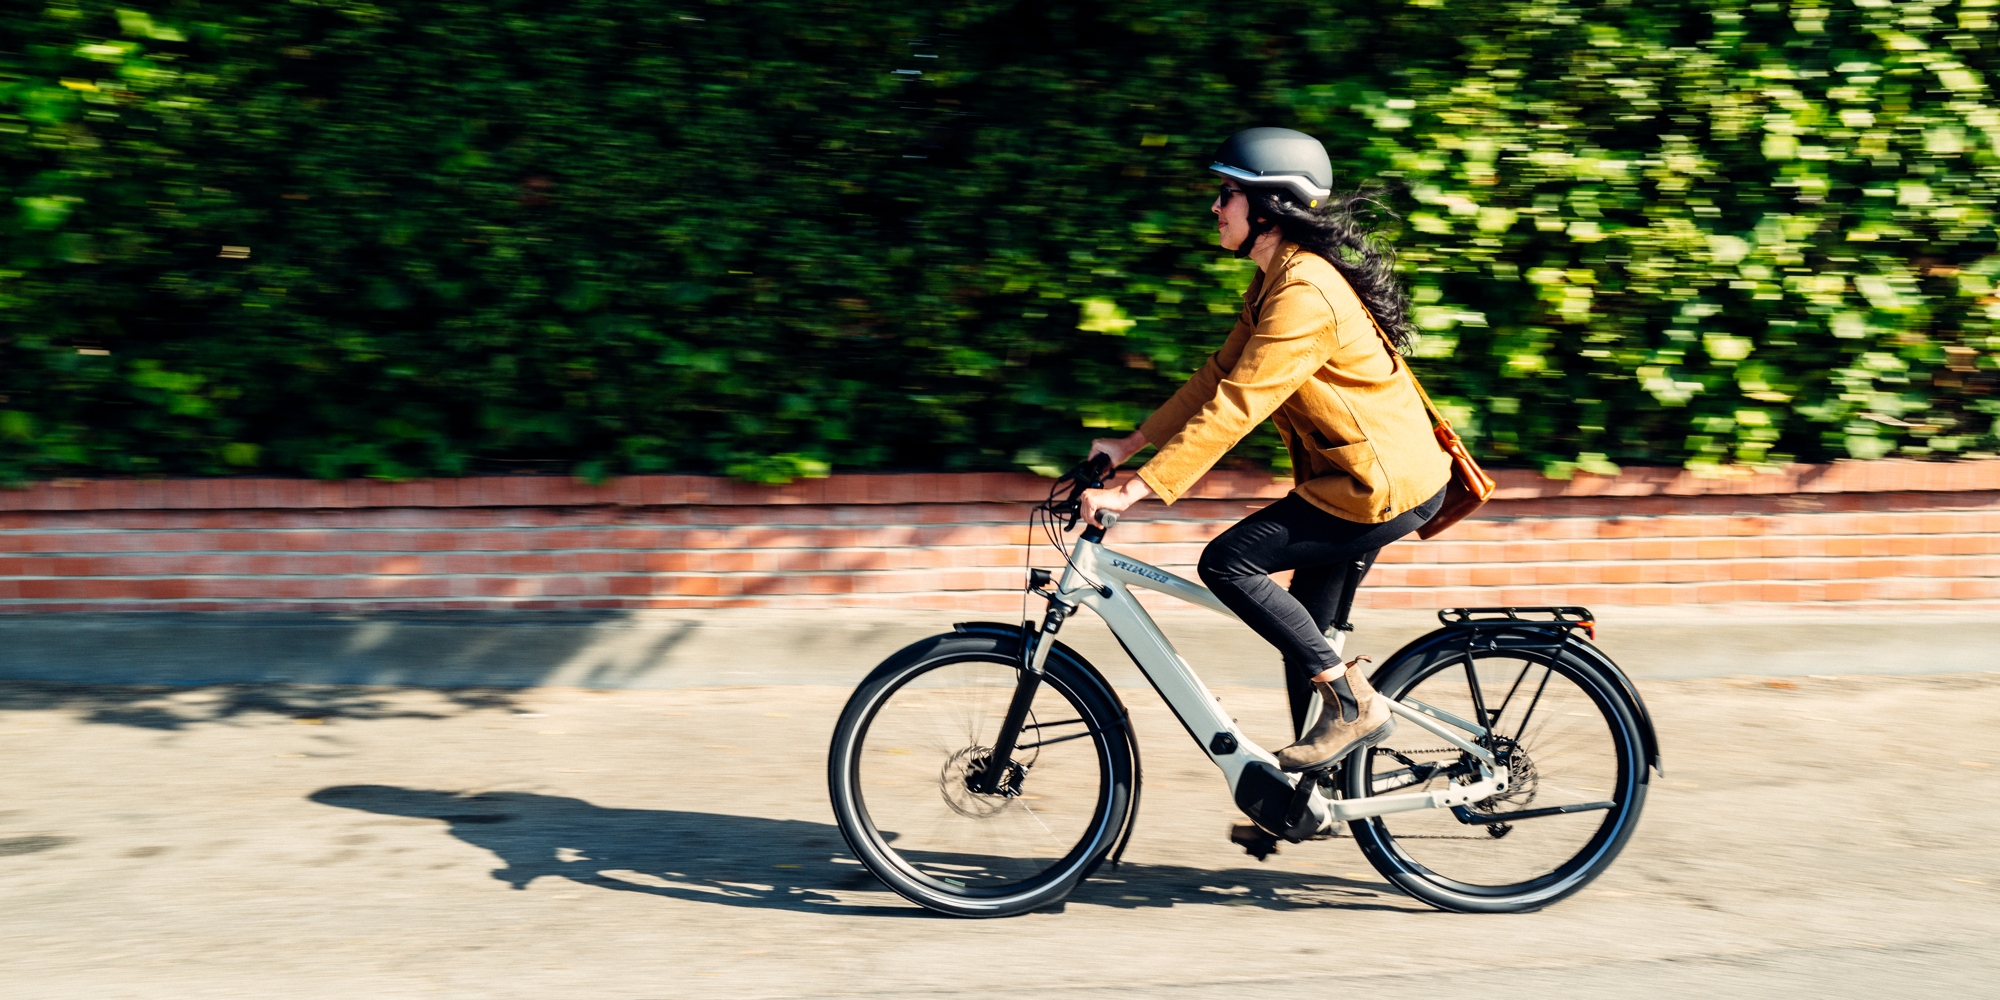 US tax credit for electric bicycle purchases back up to 30% in new proposal